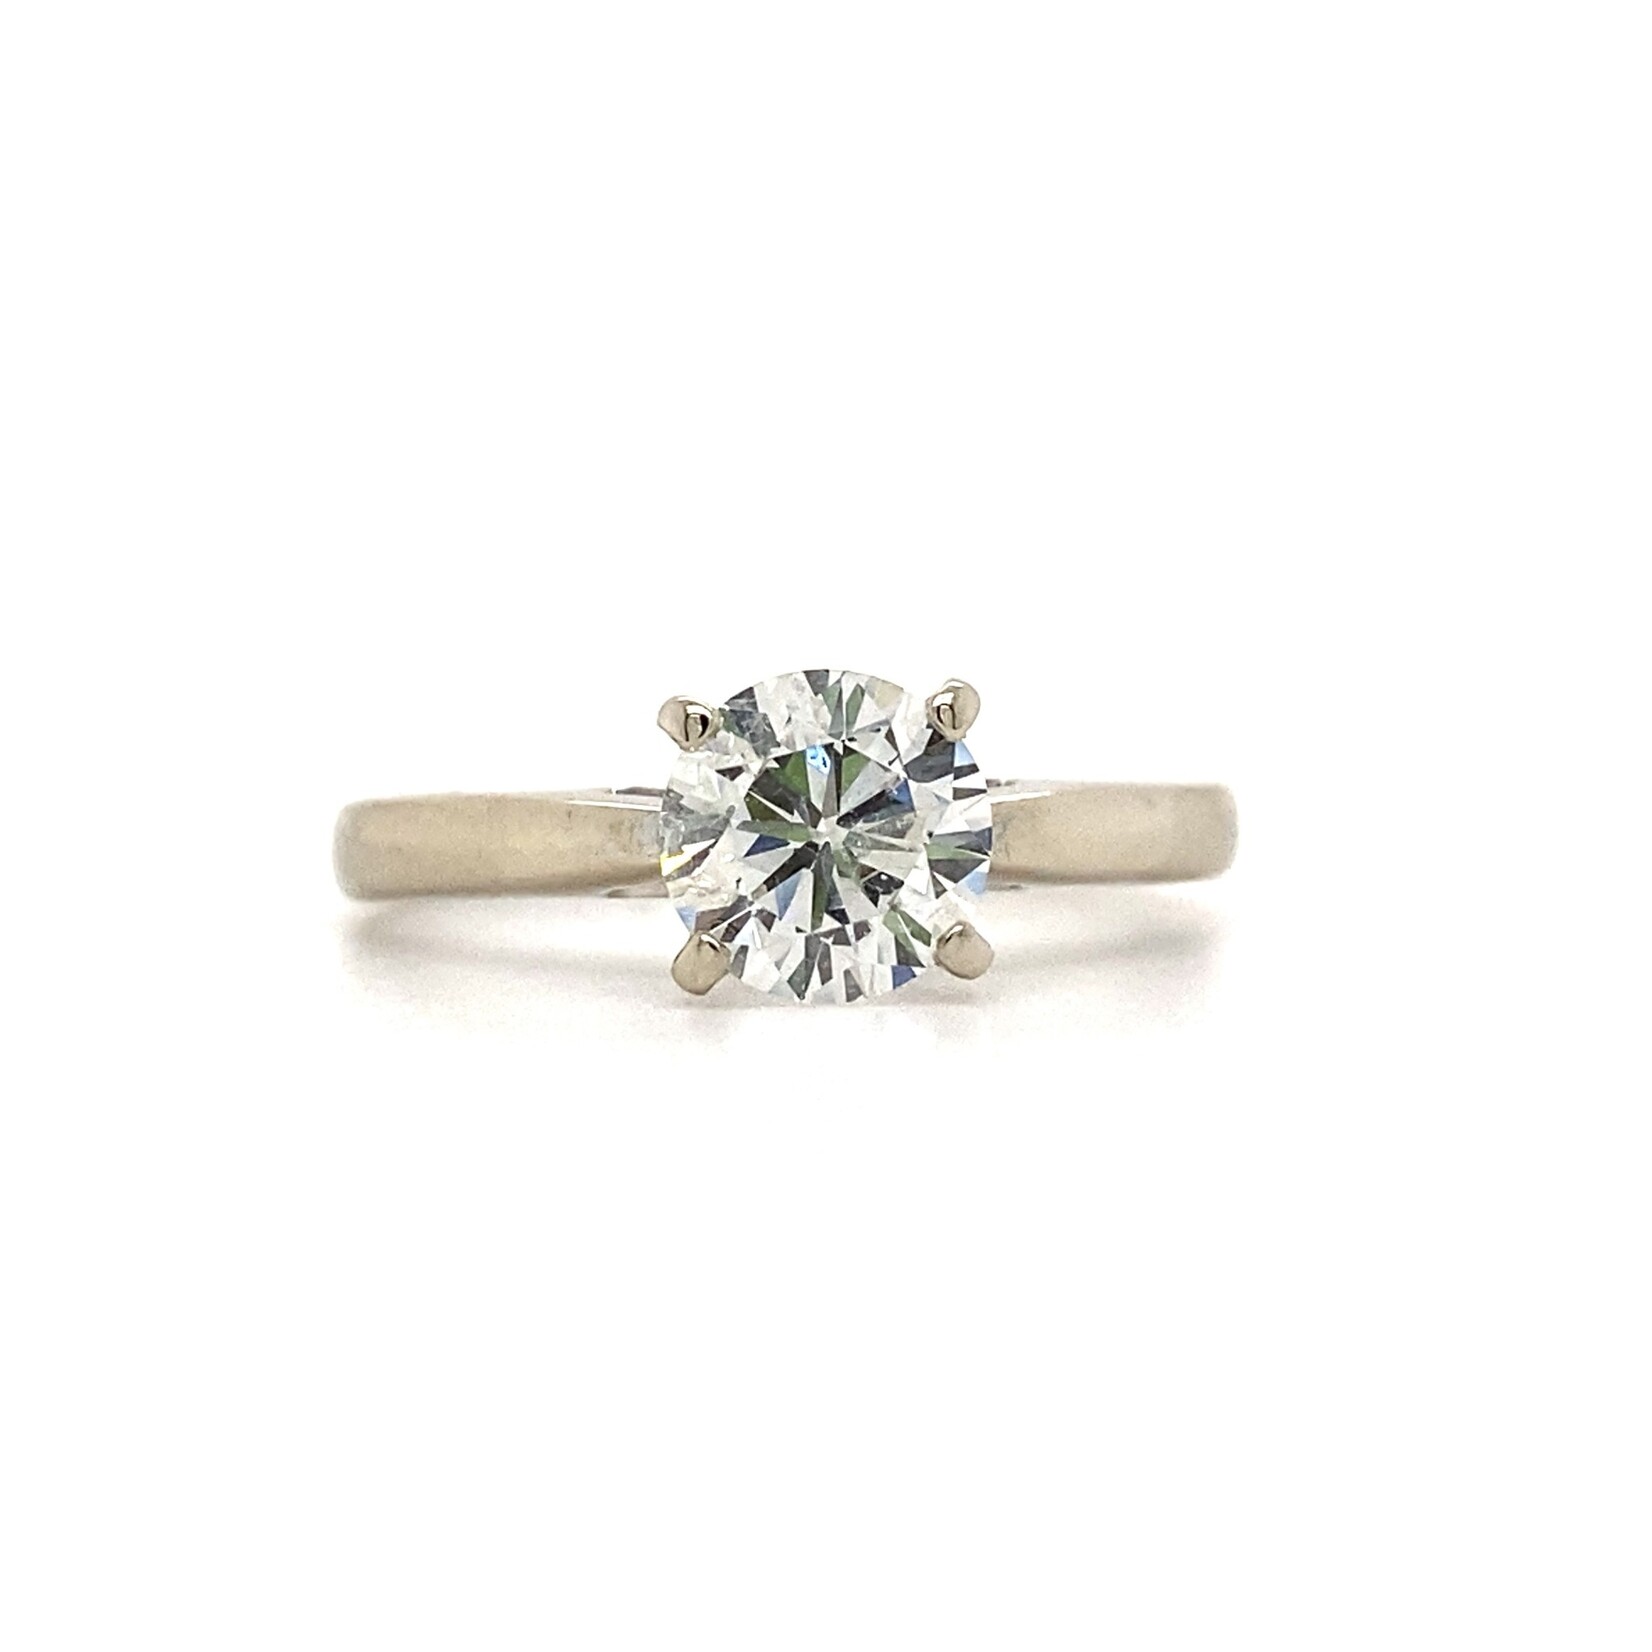 18K White Gold Diamond Solitaire ring 1ct H,I1 size 6.75